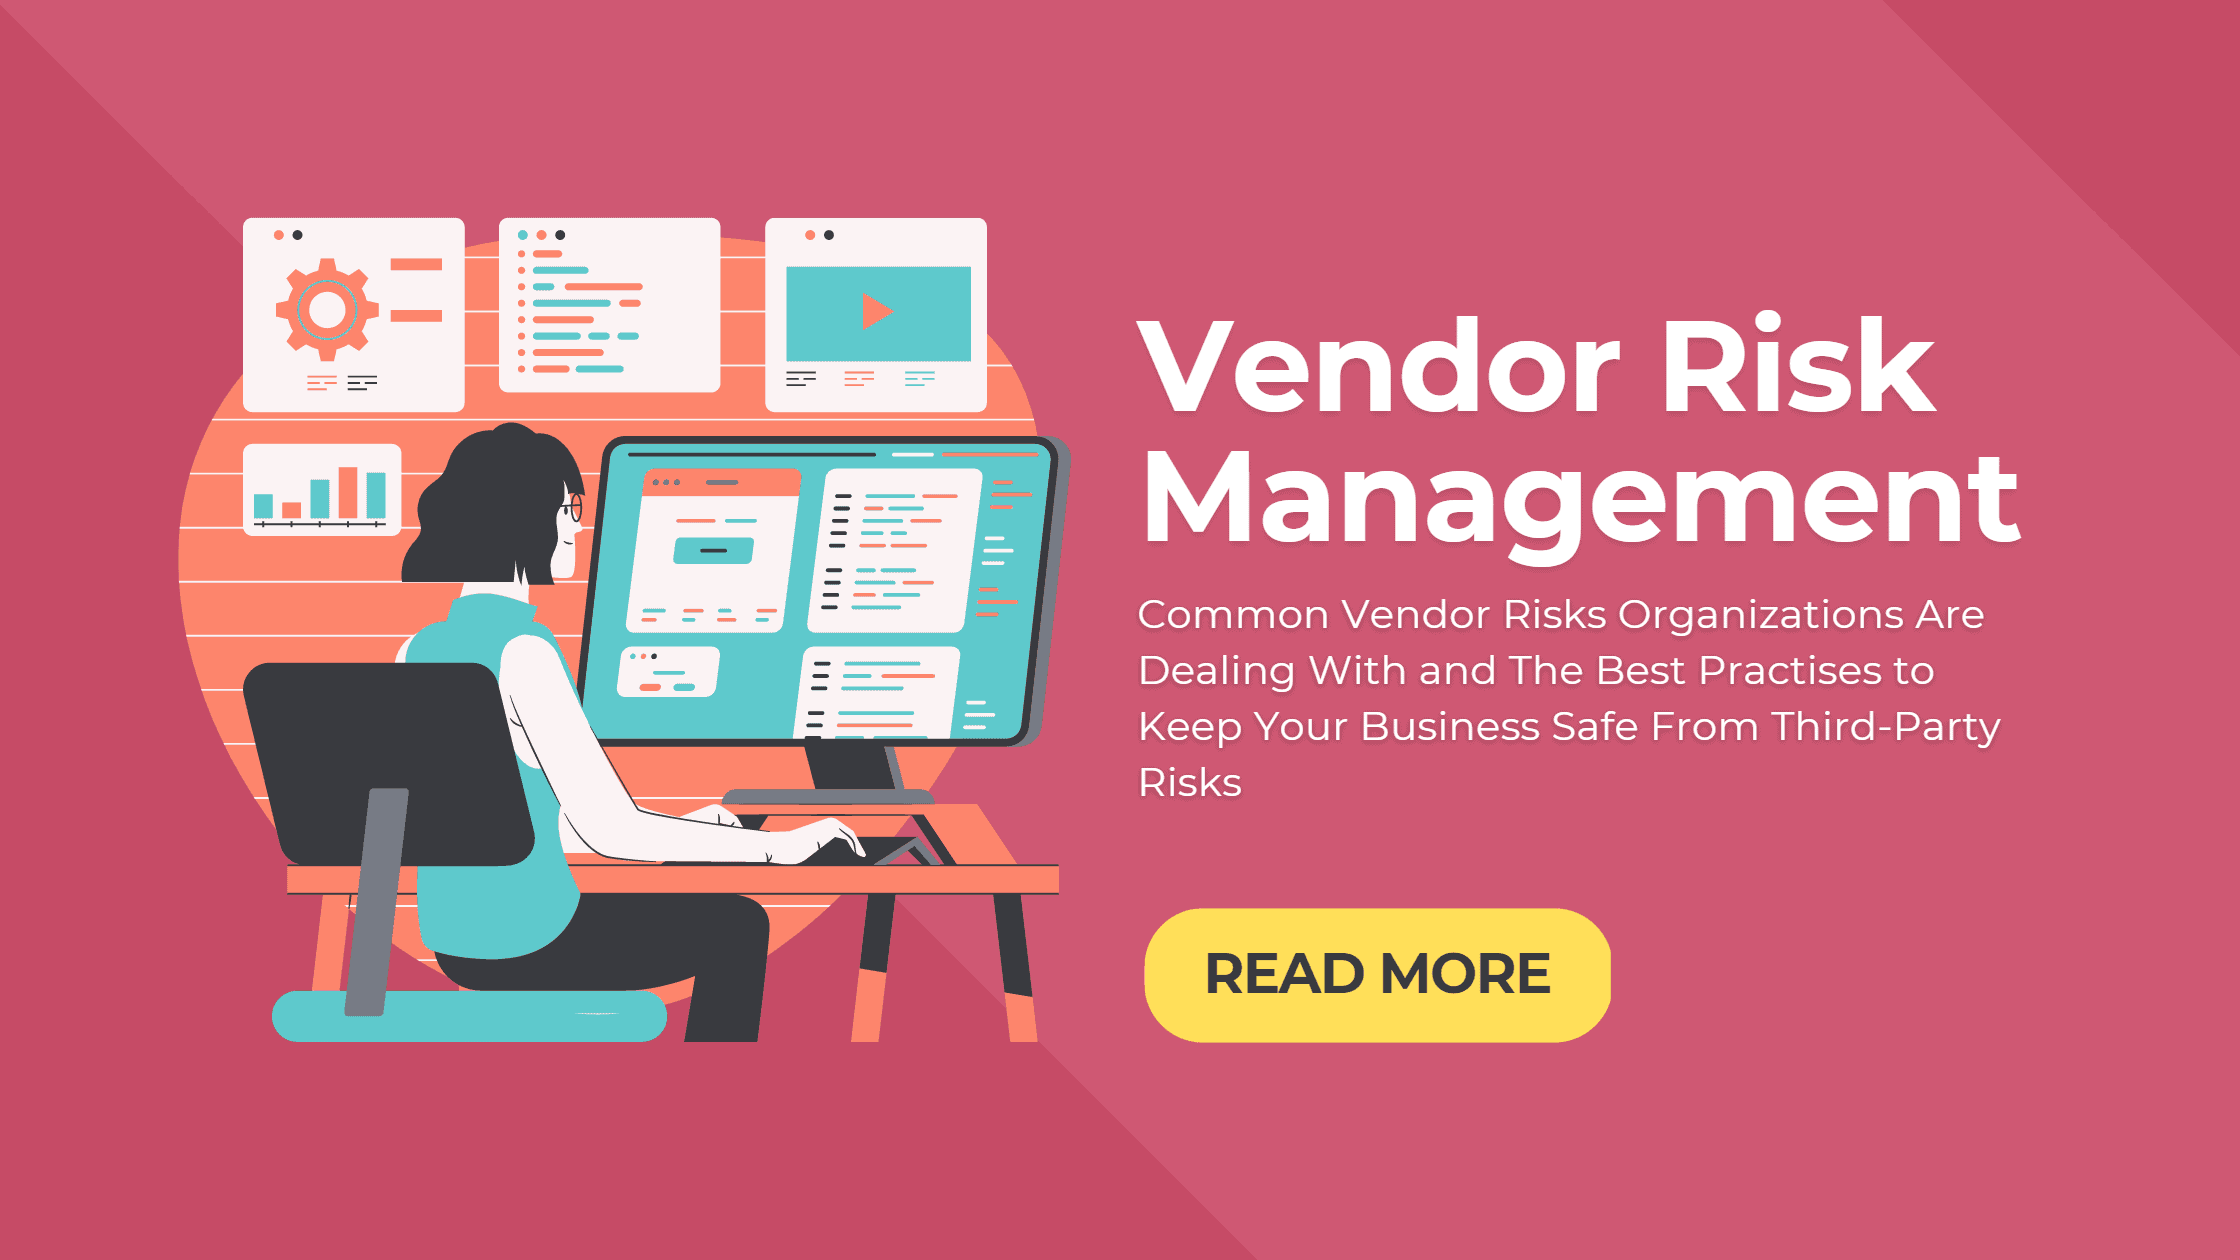 Vendor Risk Management How To Keep Your Business Safe From Third Party Risks